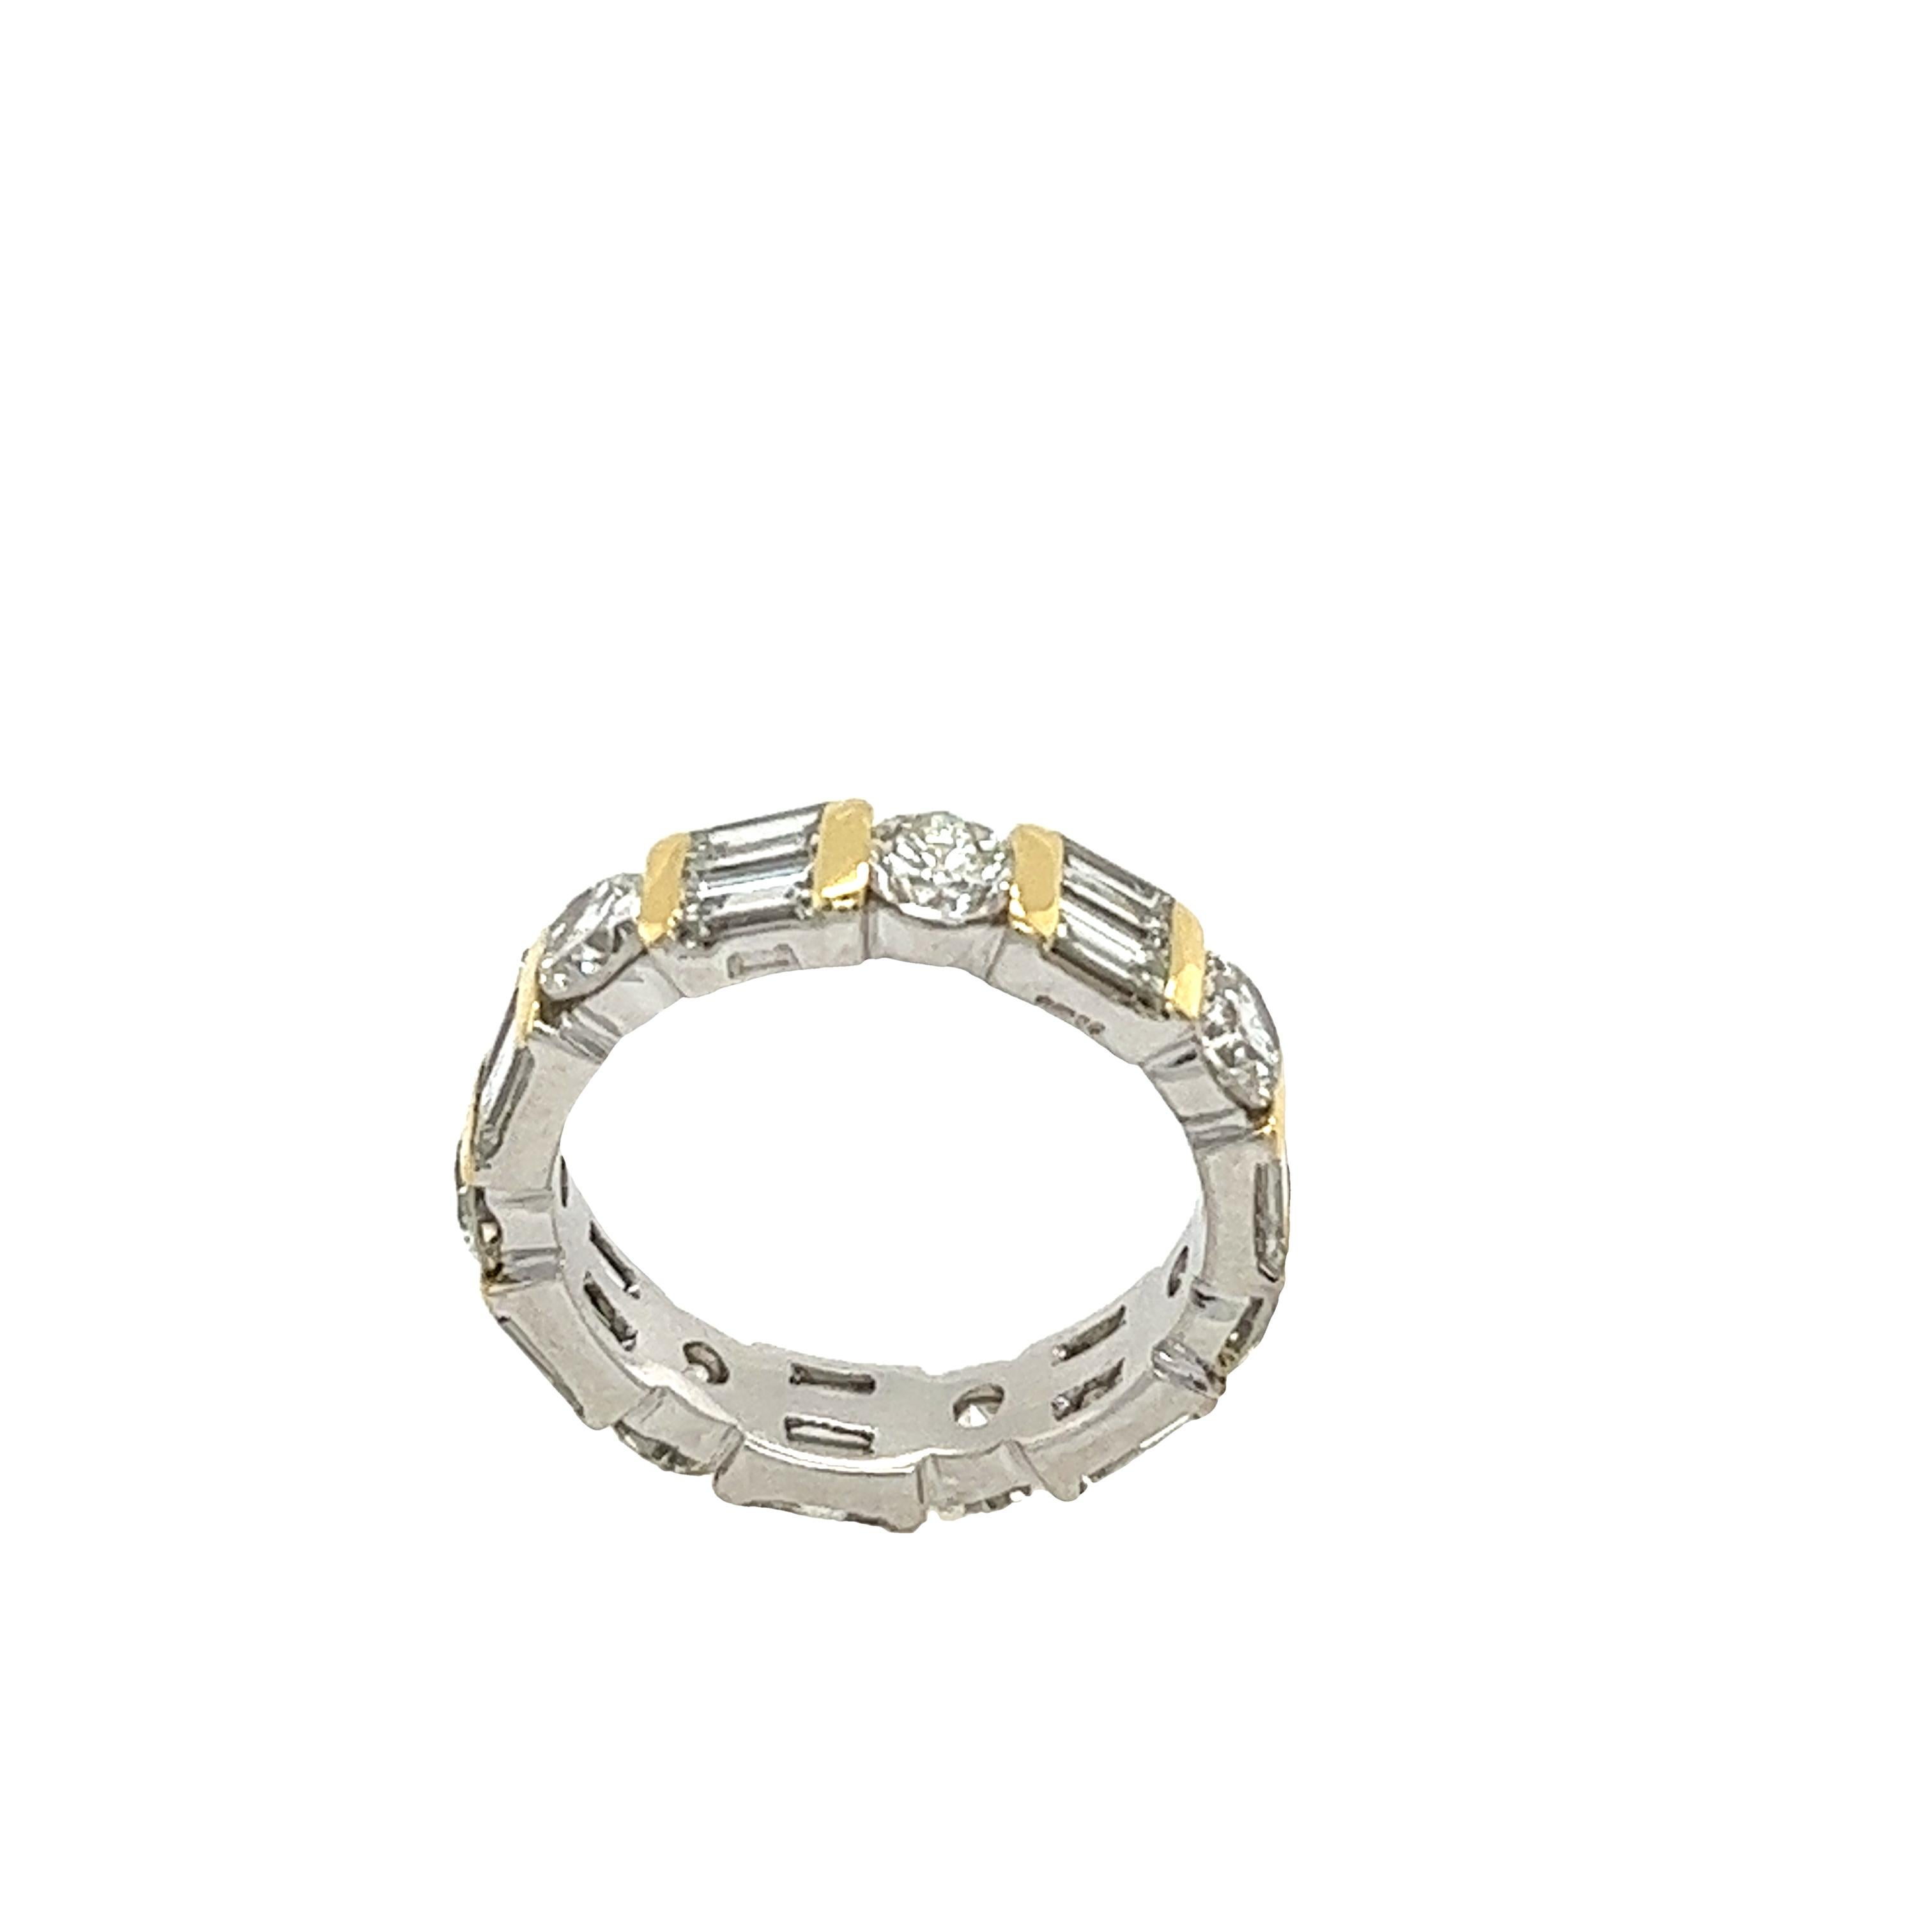 A beautiful diamond full eternity ring, set with 7 Round Brilliant Cut Diamonds & 14 Baguette cut Diamonds with 4.60ct in total.  G/H Colour & SI clarity.
This beautiful ring is a symbol of everlasting love.

Total Diamond Weight: 4.60ct 
Diamond